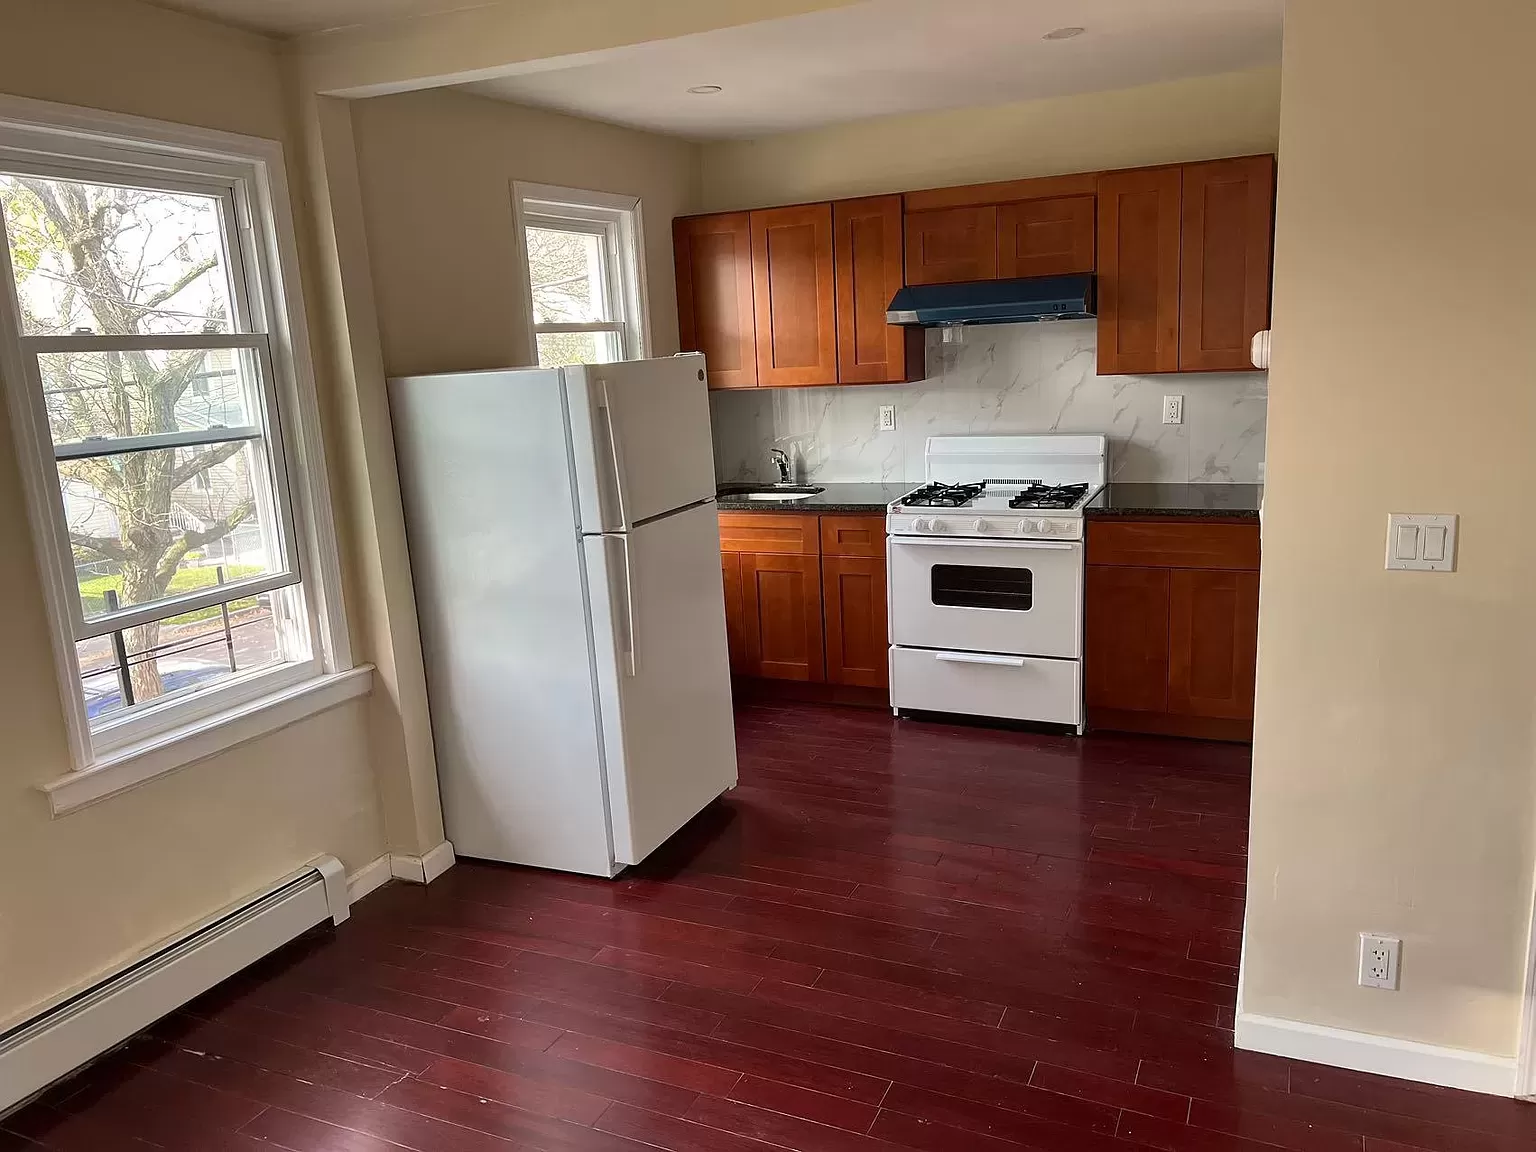 Apartment for Rent in Bellerose Manor, NY Queens